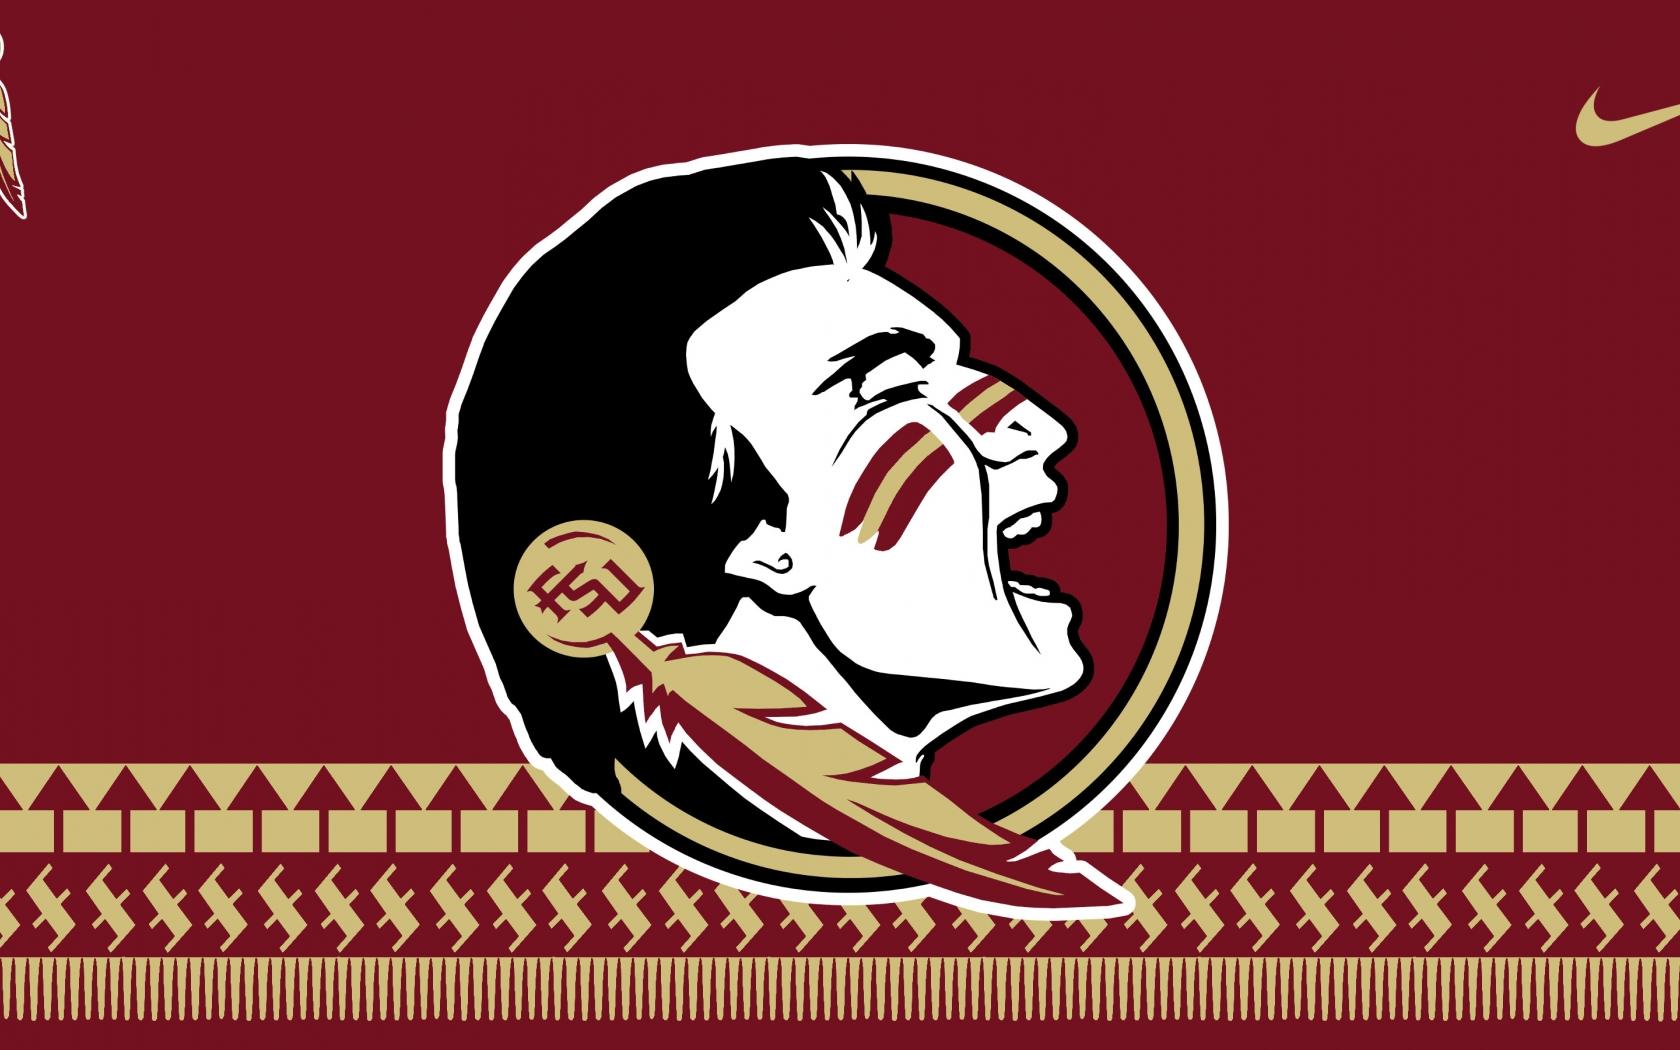 Free download FSU Miami Rivalry Weekend Wallpaper AND MORE